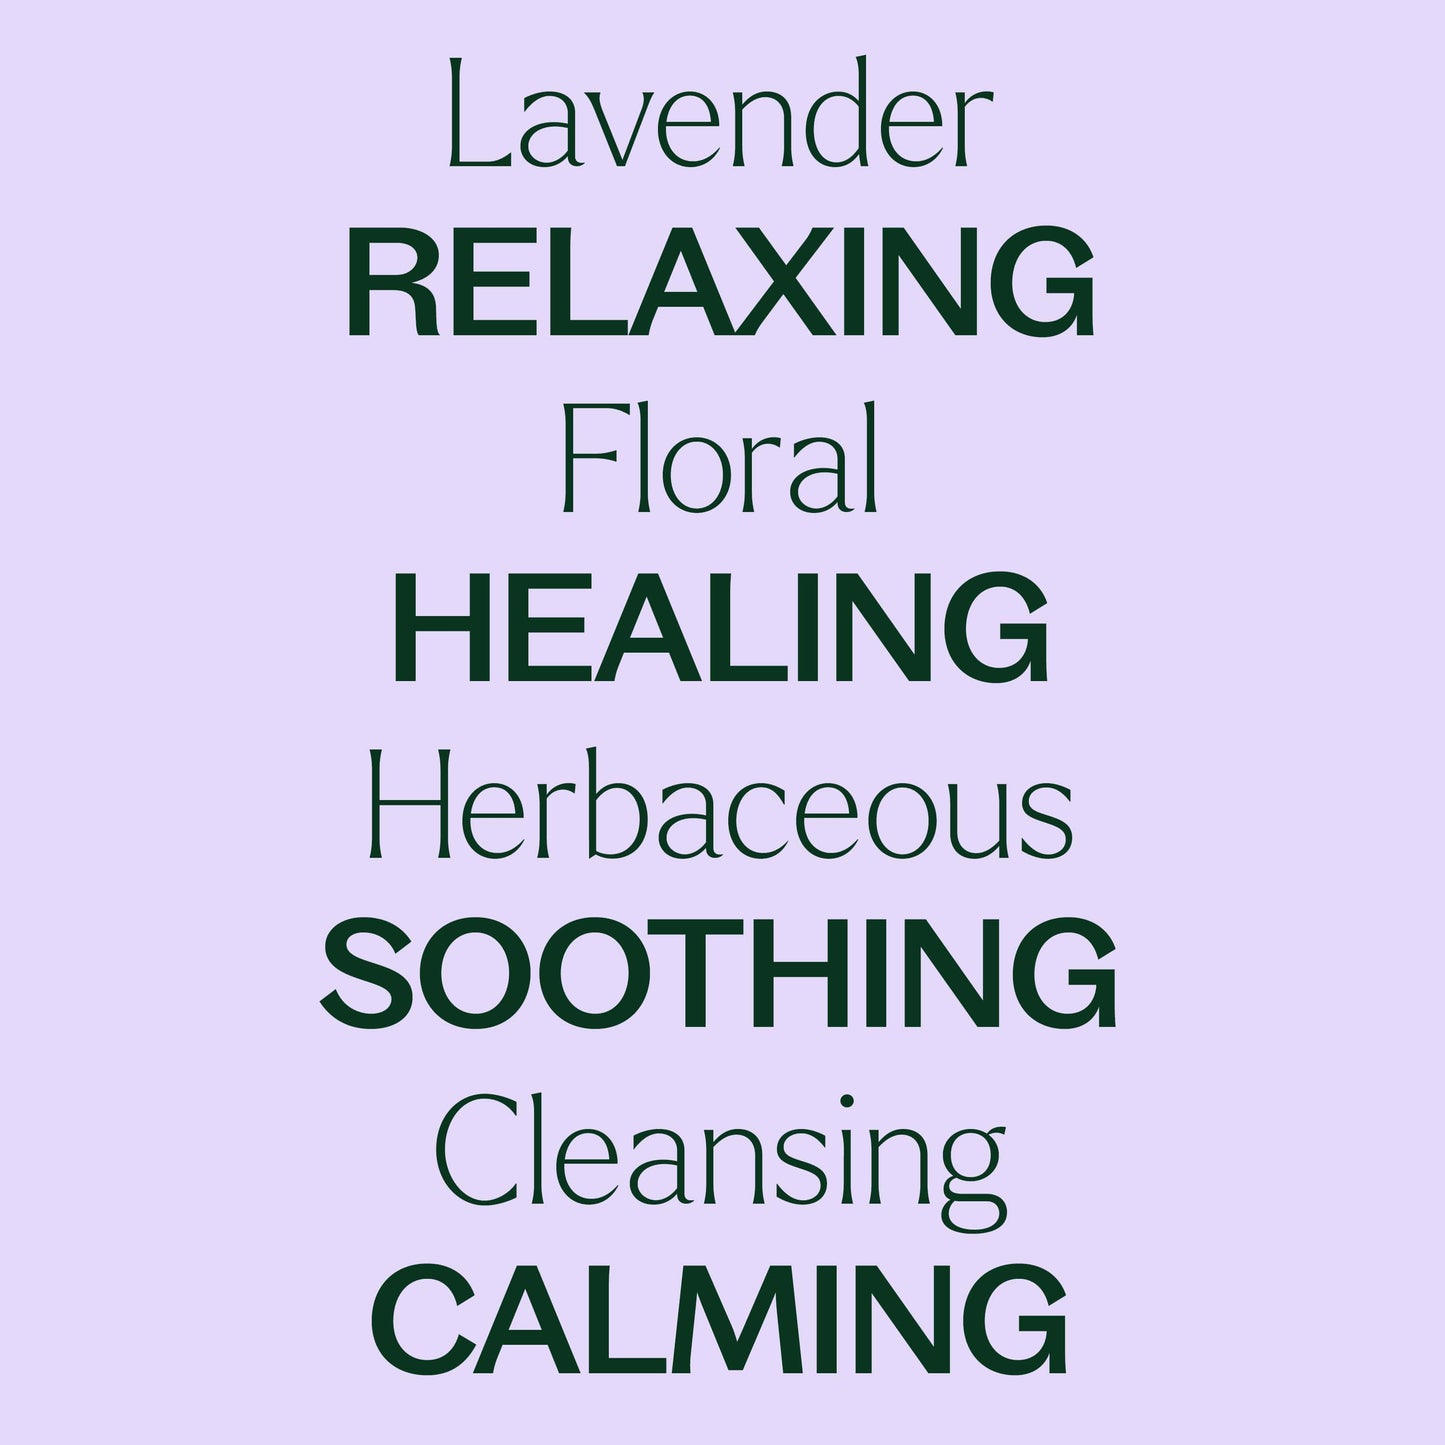 Organic Lavender Essential Oil is relaxing, floral, healing, soothing, cleansing and calming